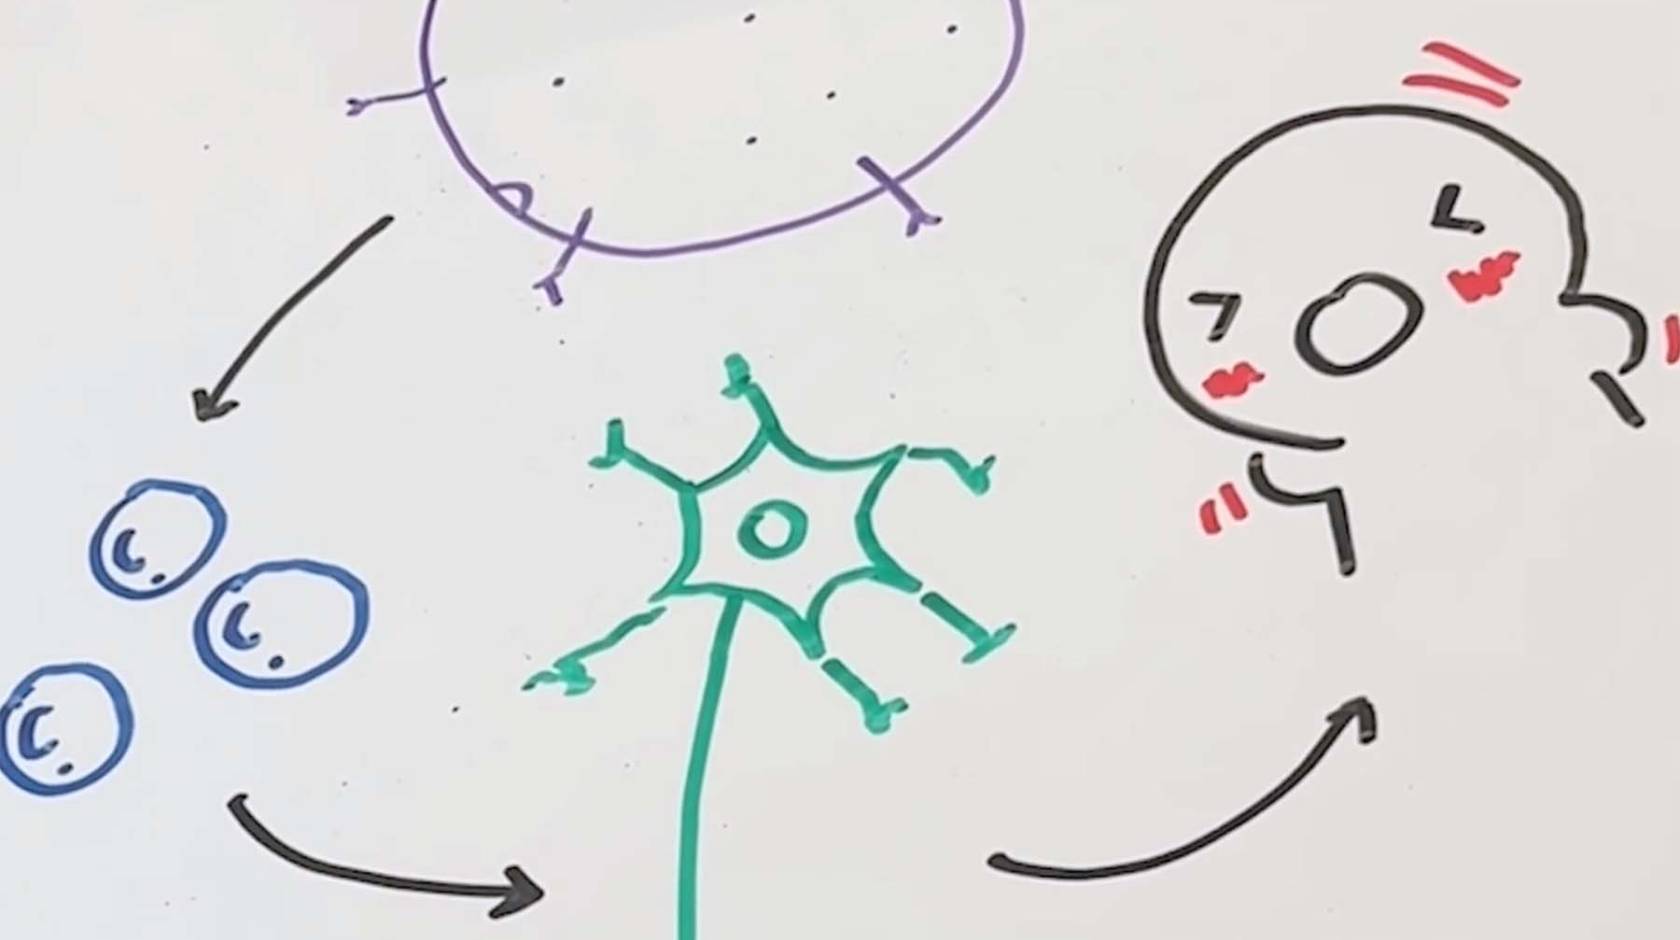 Illustration with whiteboard markers of a little cartoon agitated by itch and how the nervous system works on a whiteboard